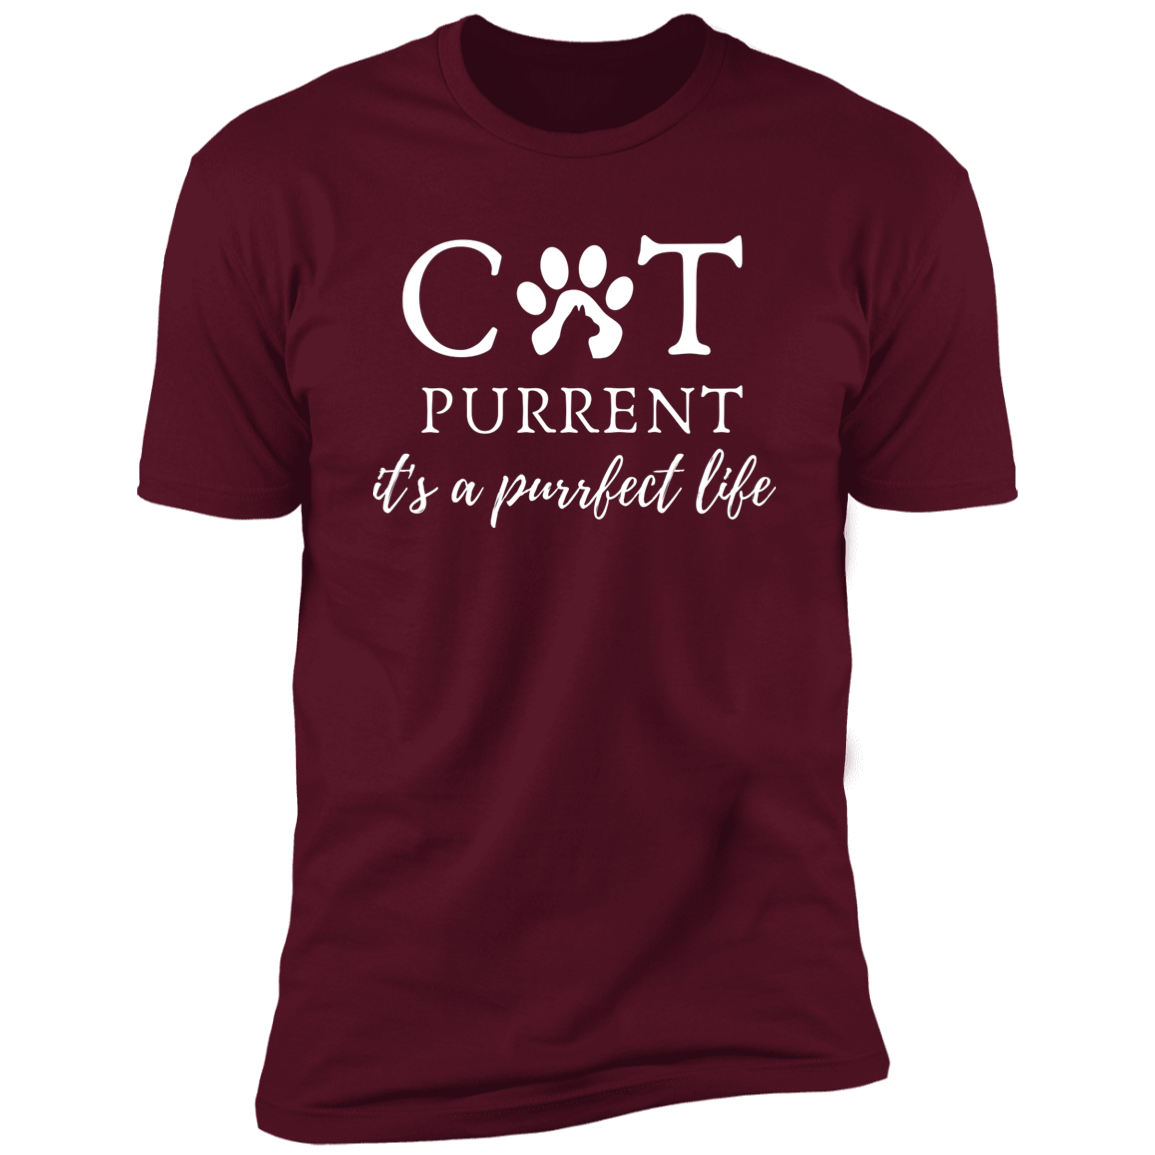 Cat Purrent It's a Purrfect Life T-shirt, Cat Parent Shirt for humans, in maroon